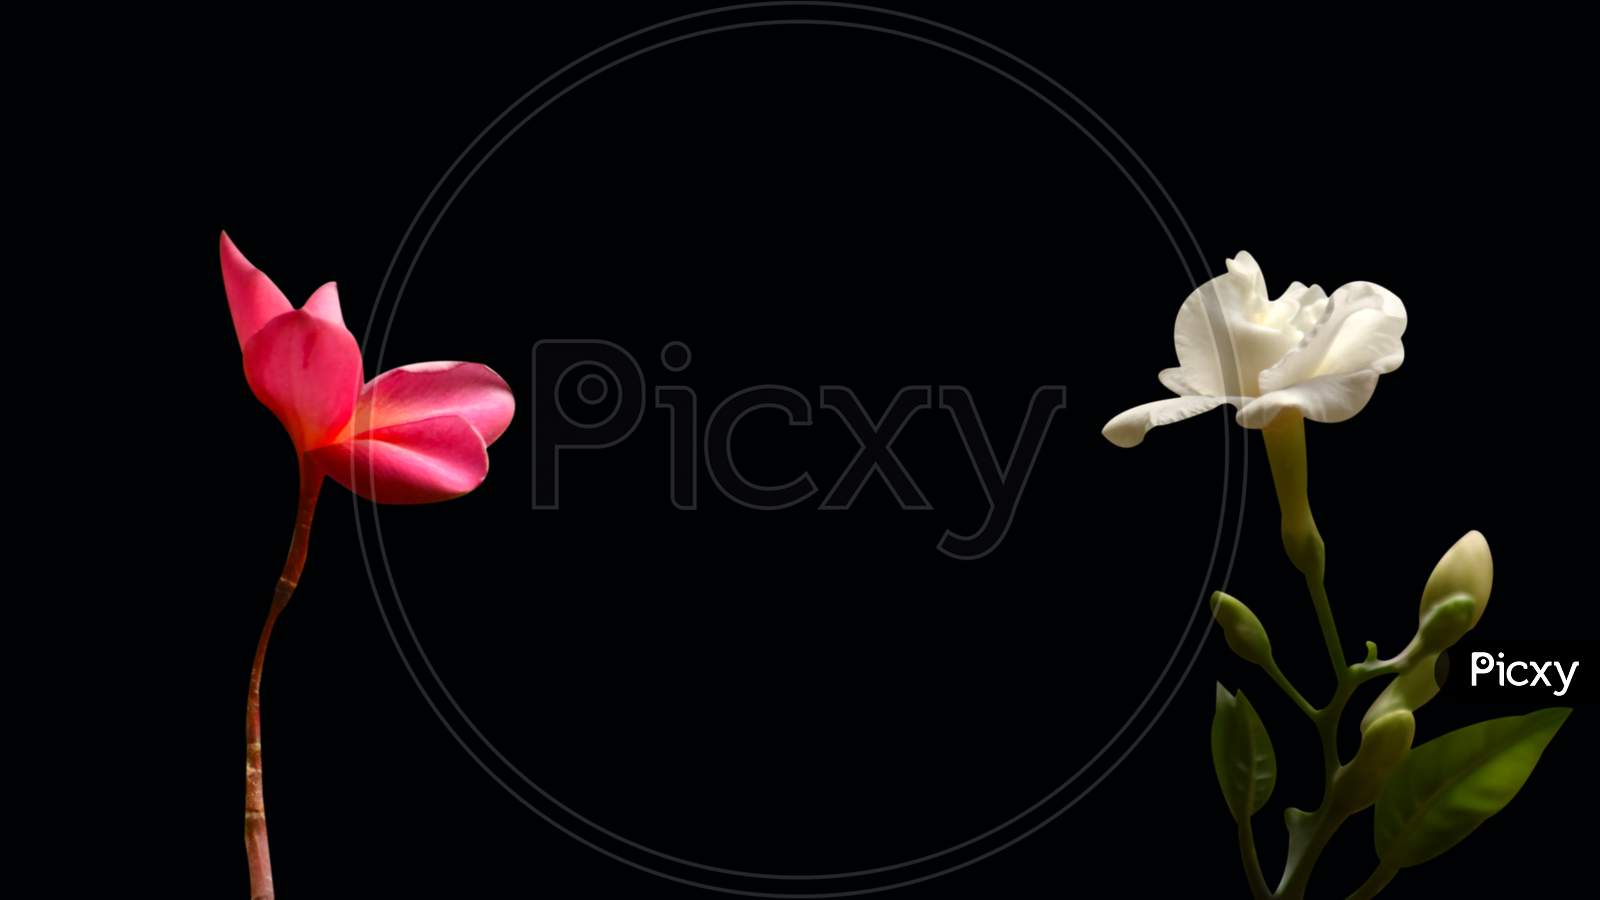 Beautiful White And Pink Color Flowers Isolated On Black Background